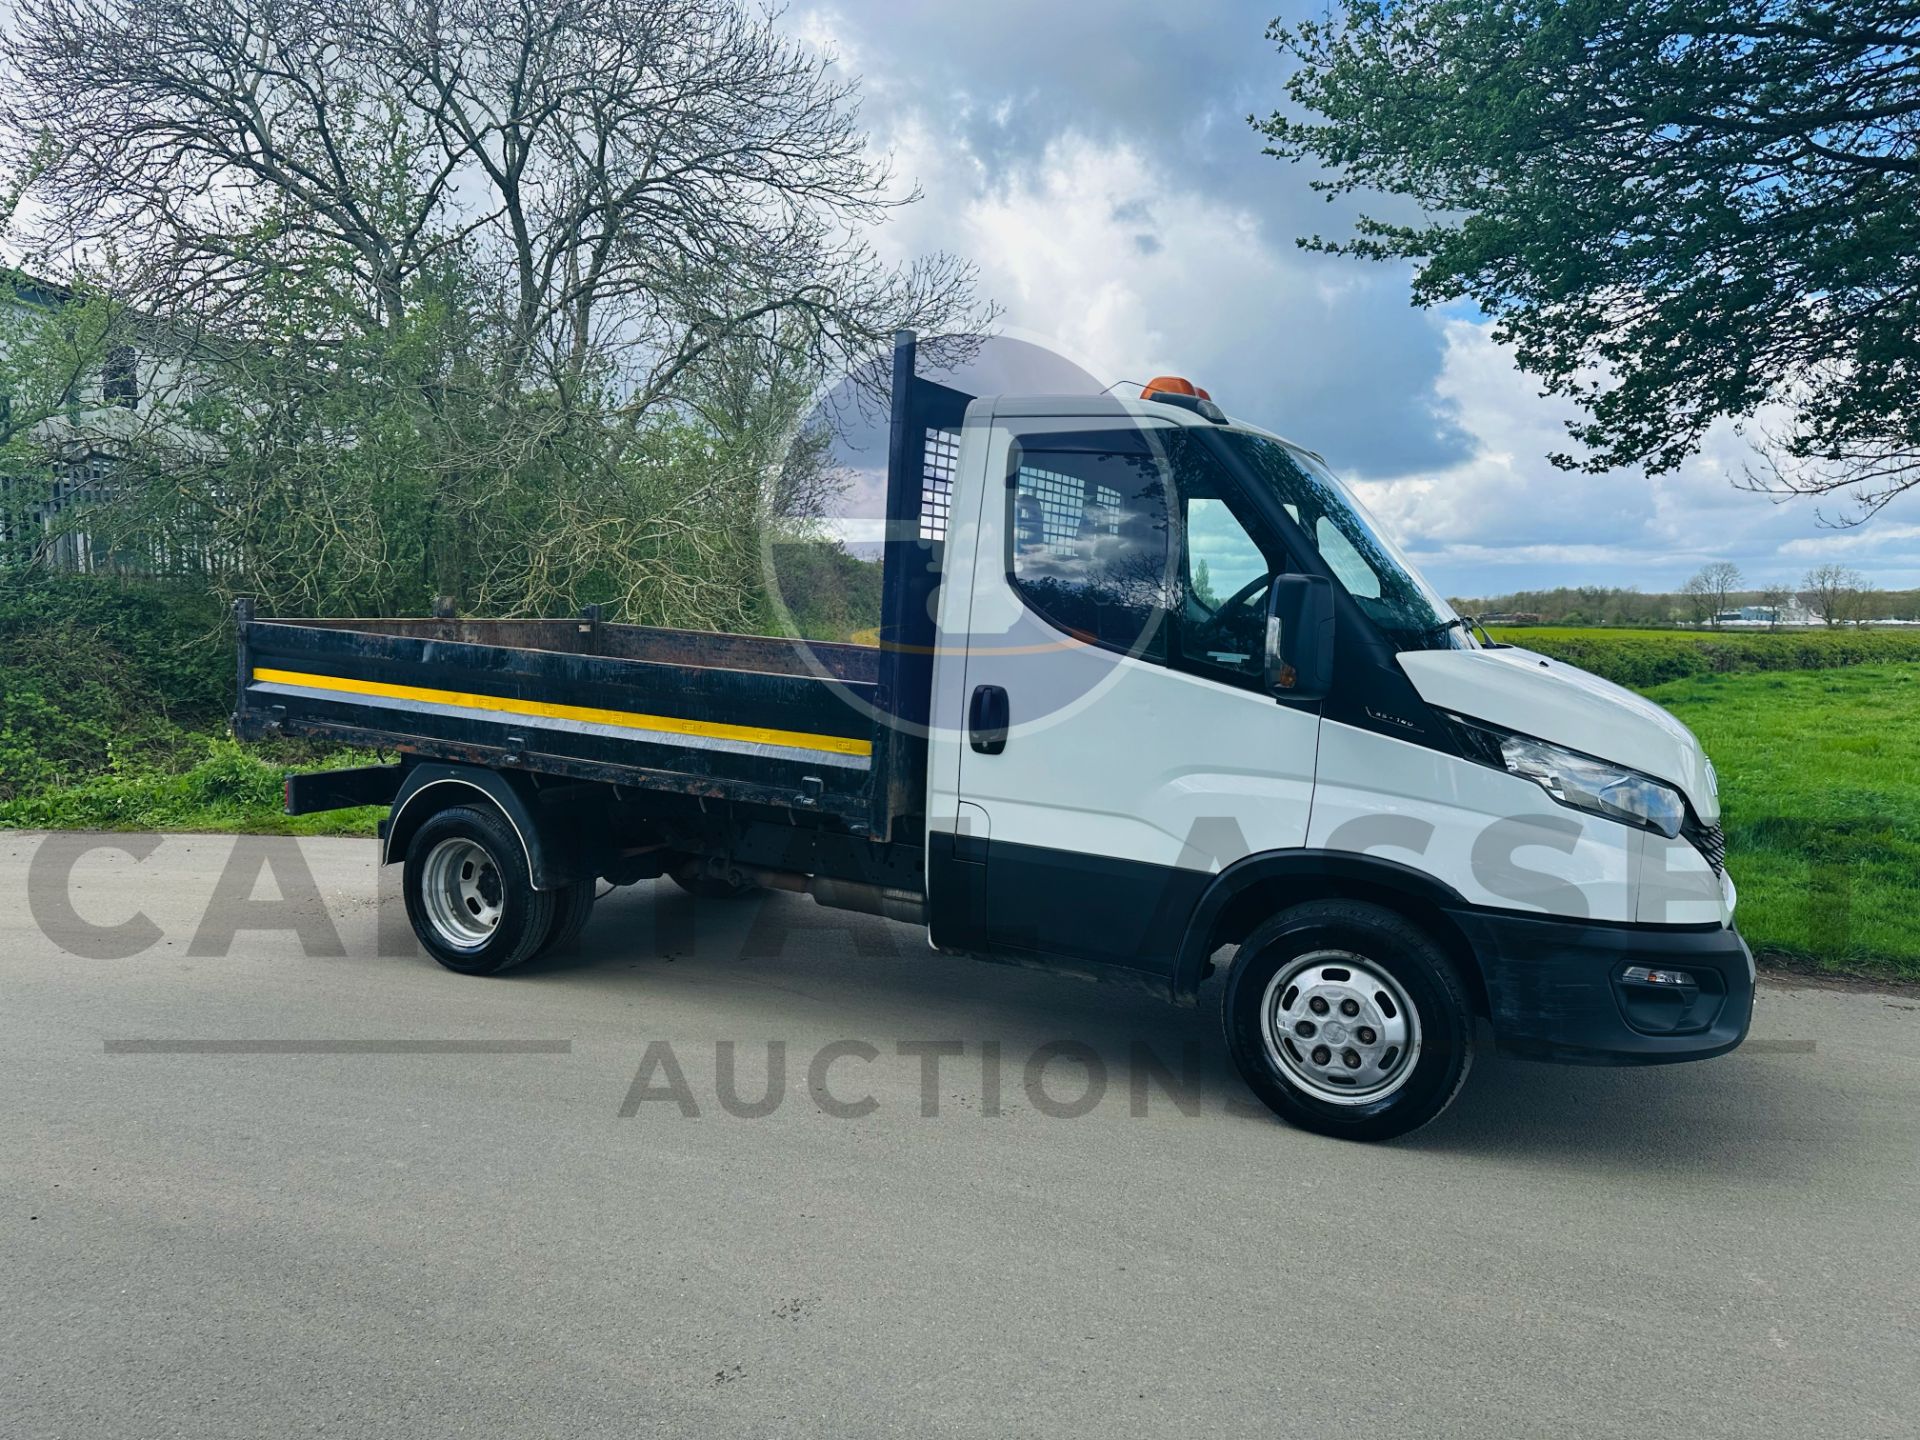 (ON SALE) IVECO DAILY 35C14 *SINGLE CAB - TIPPER TRUCK* (2020 - EURO 6) 2.3 DIESEL - (3500 KG) - Image 13 of 28